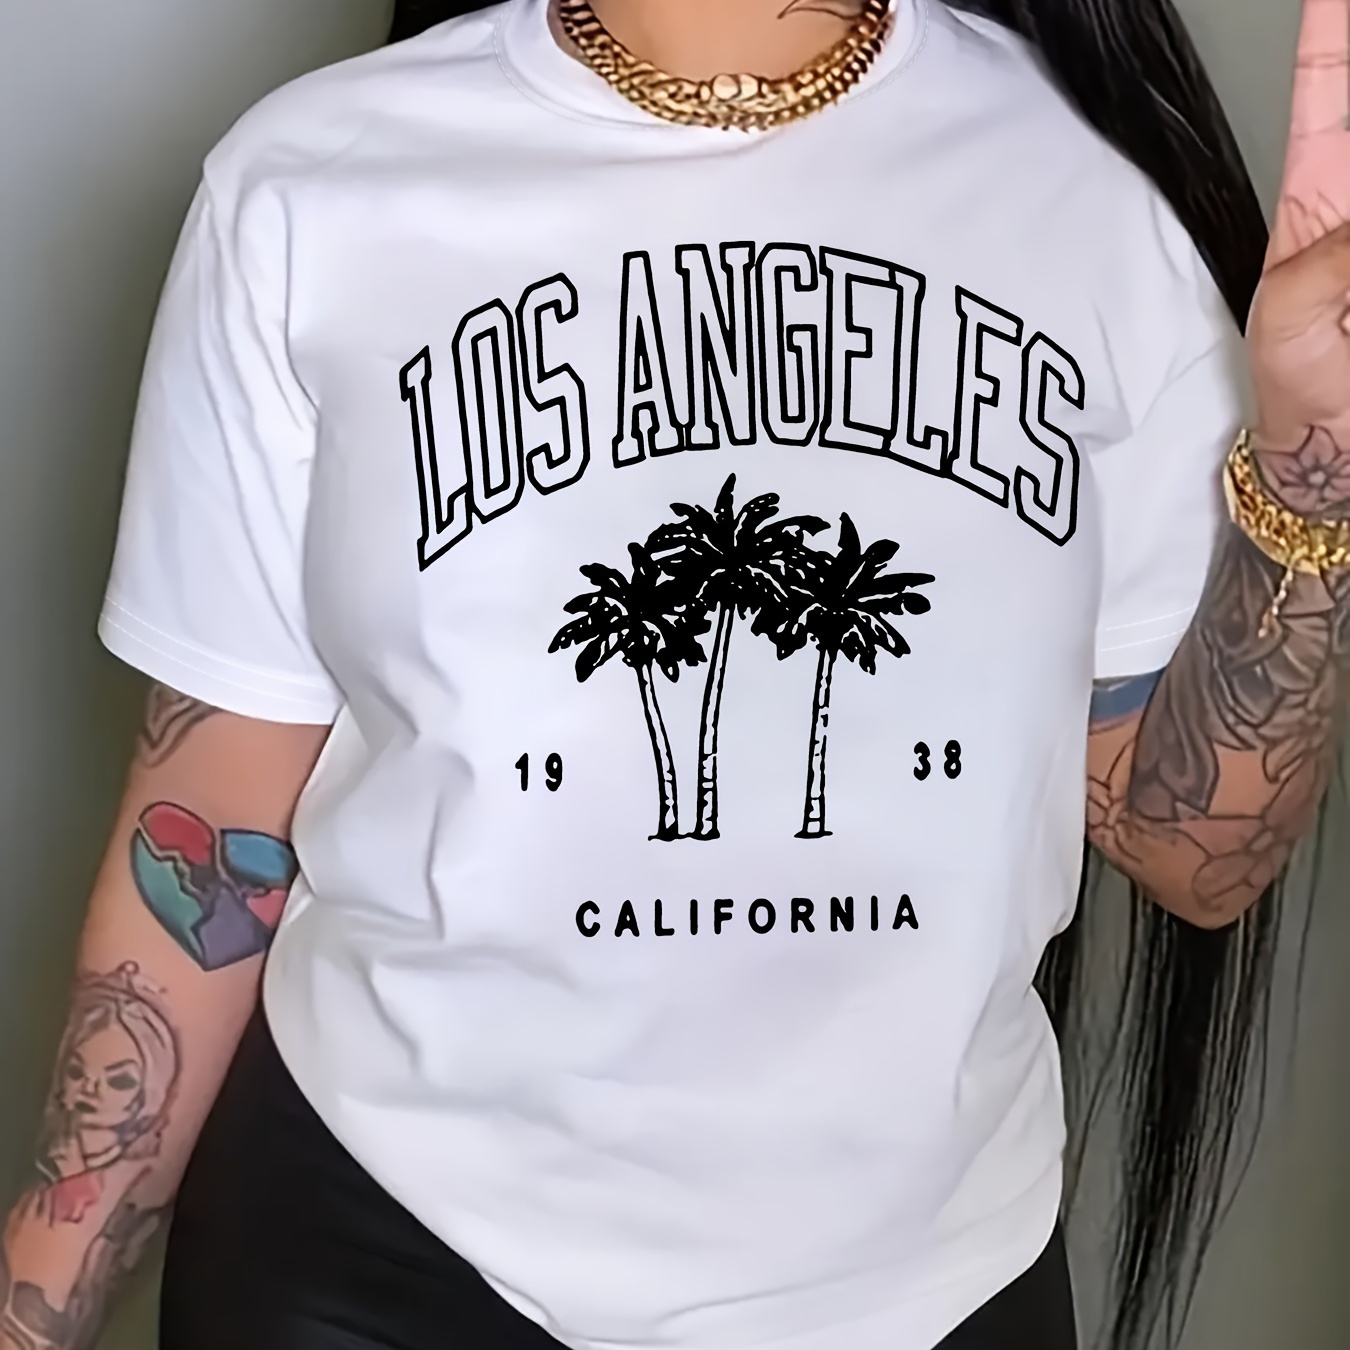 

Los Angeles Print T-shirt, Short Sleeve Crew Neck Casual Top For Summer & Spring, Women's Clothing